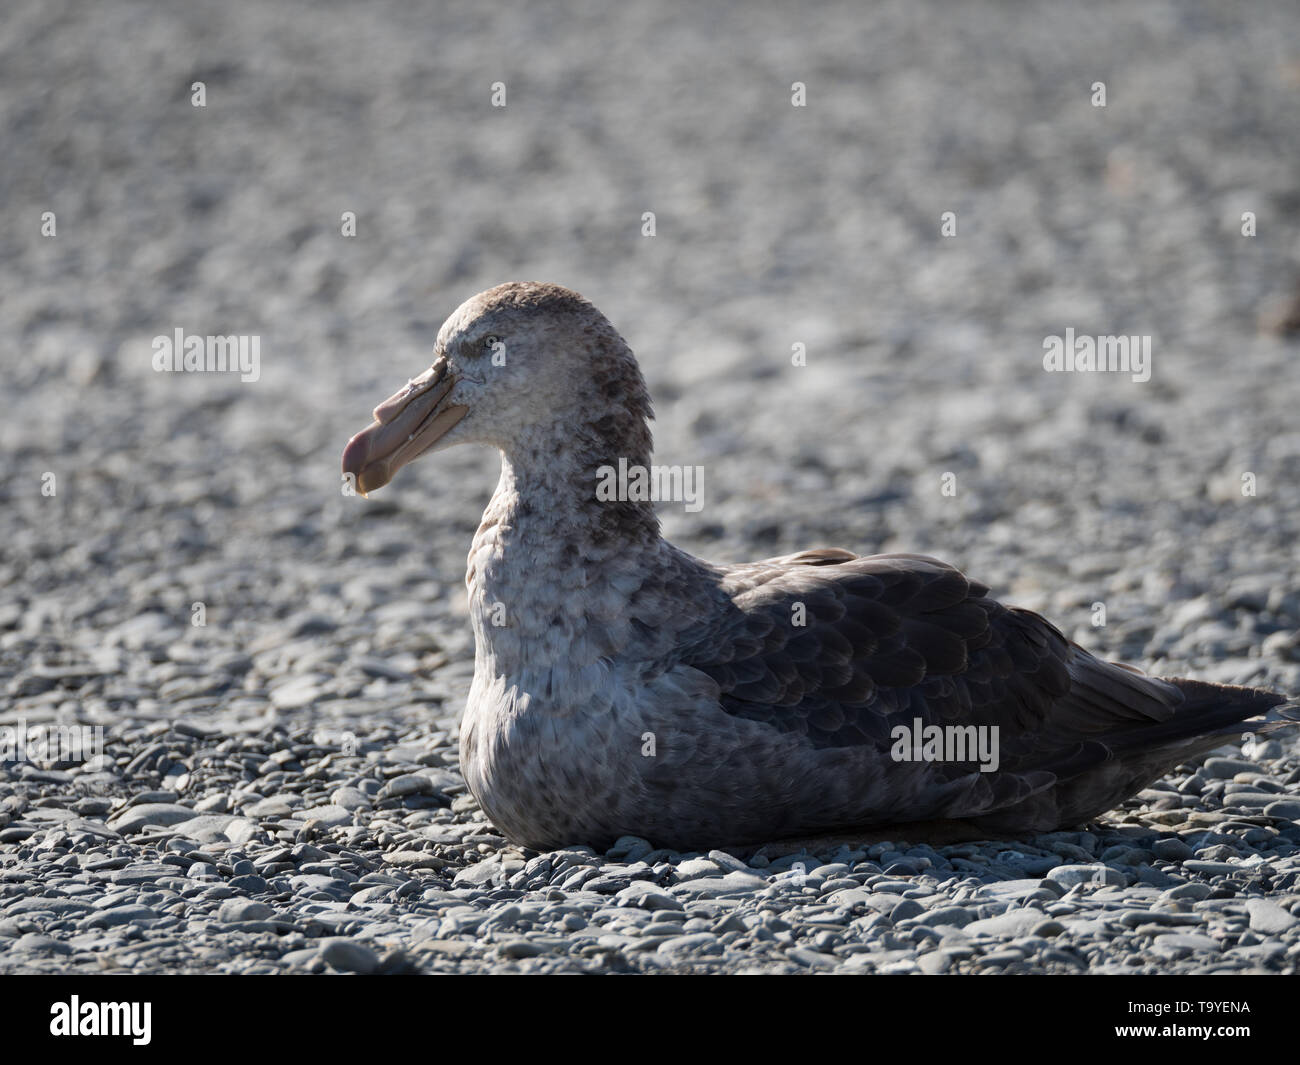 Close up of a Southern Giant Petrel sitting on a rocky beach in South Georgia. It is Shown in profile and photographed with a shallow depth of field. Stock Photo